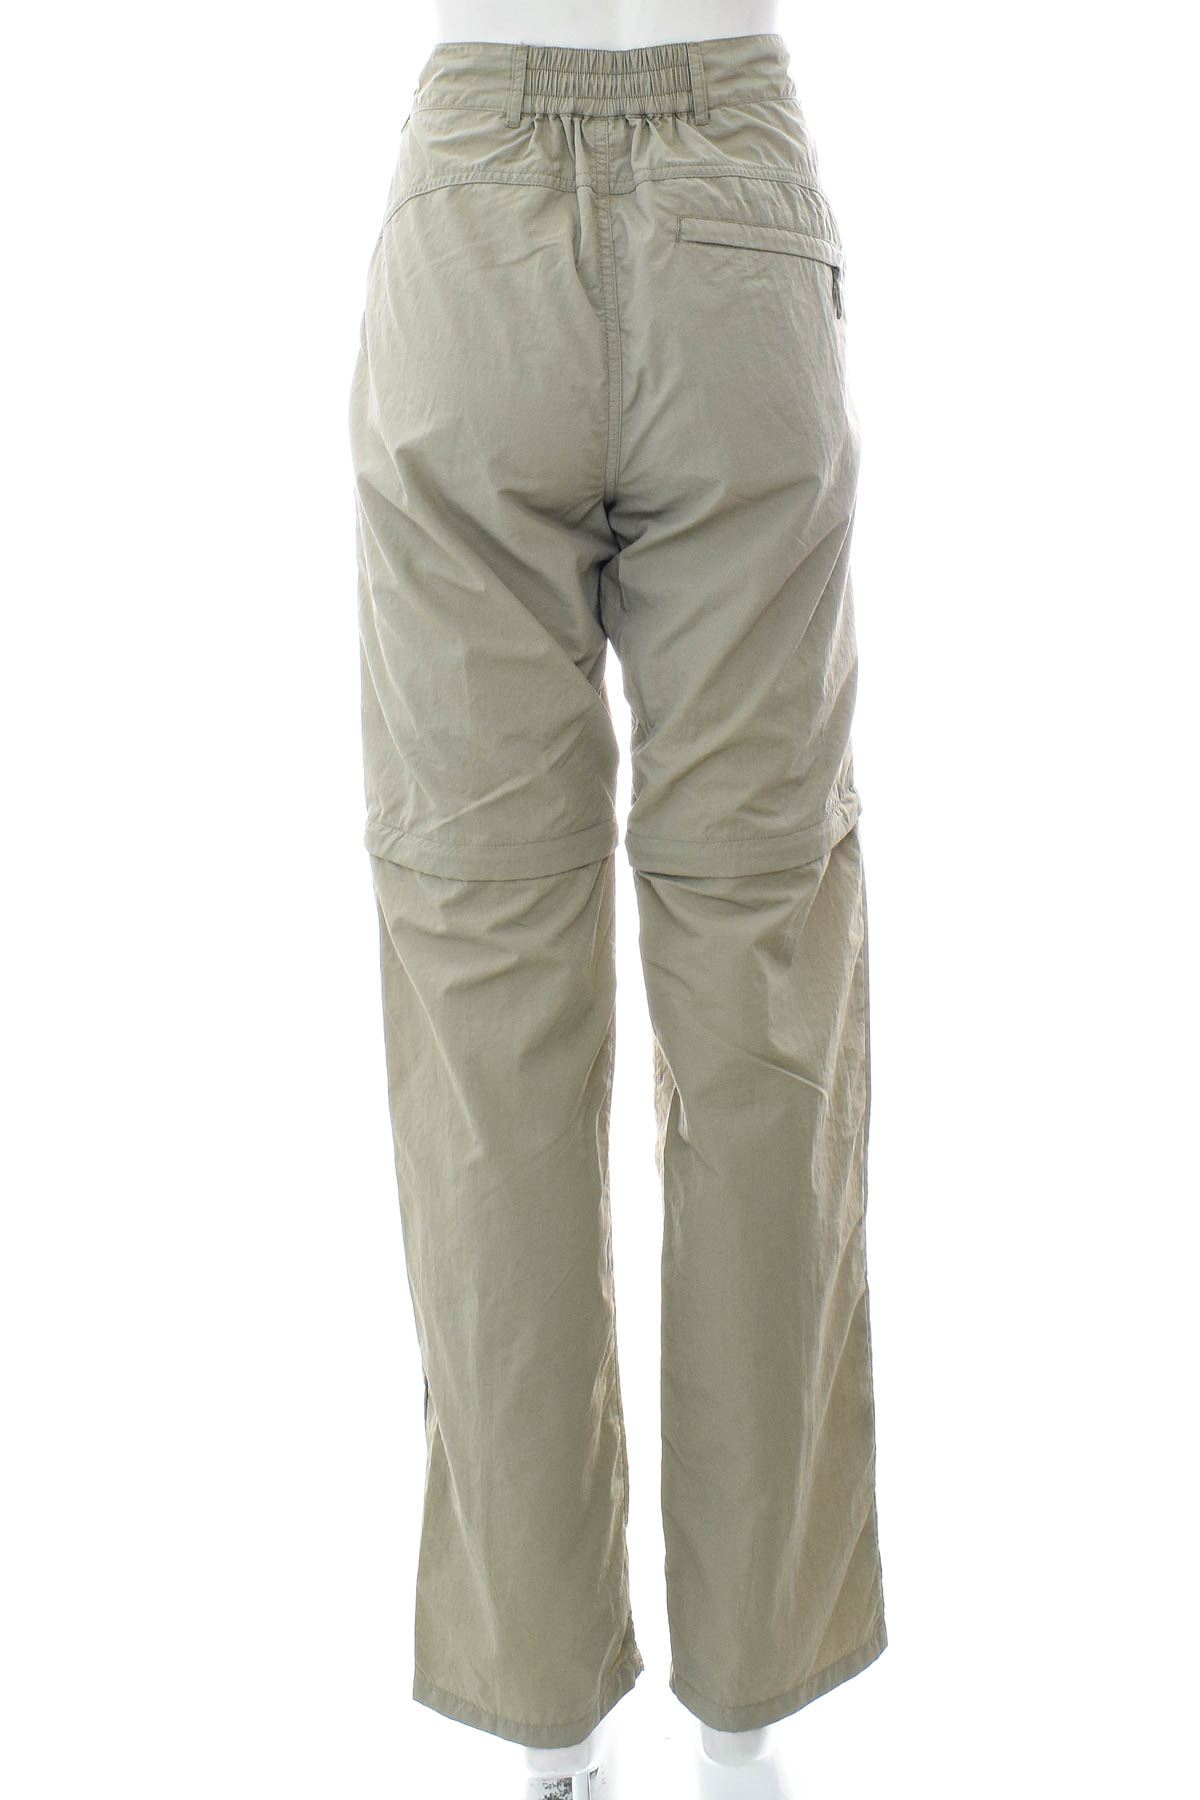 Women's trousers - Outdoor PERFORMANCE by Tchibo - 1